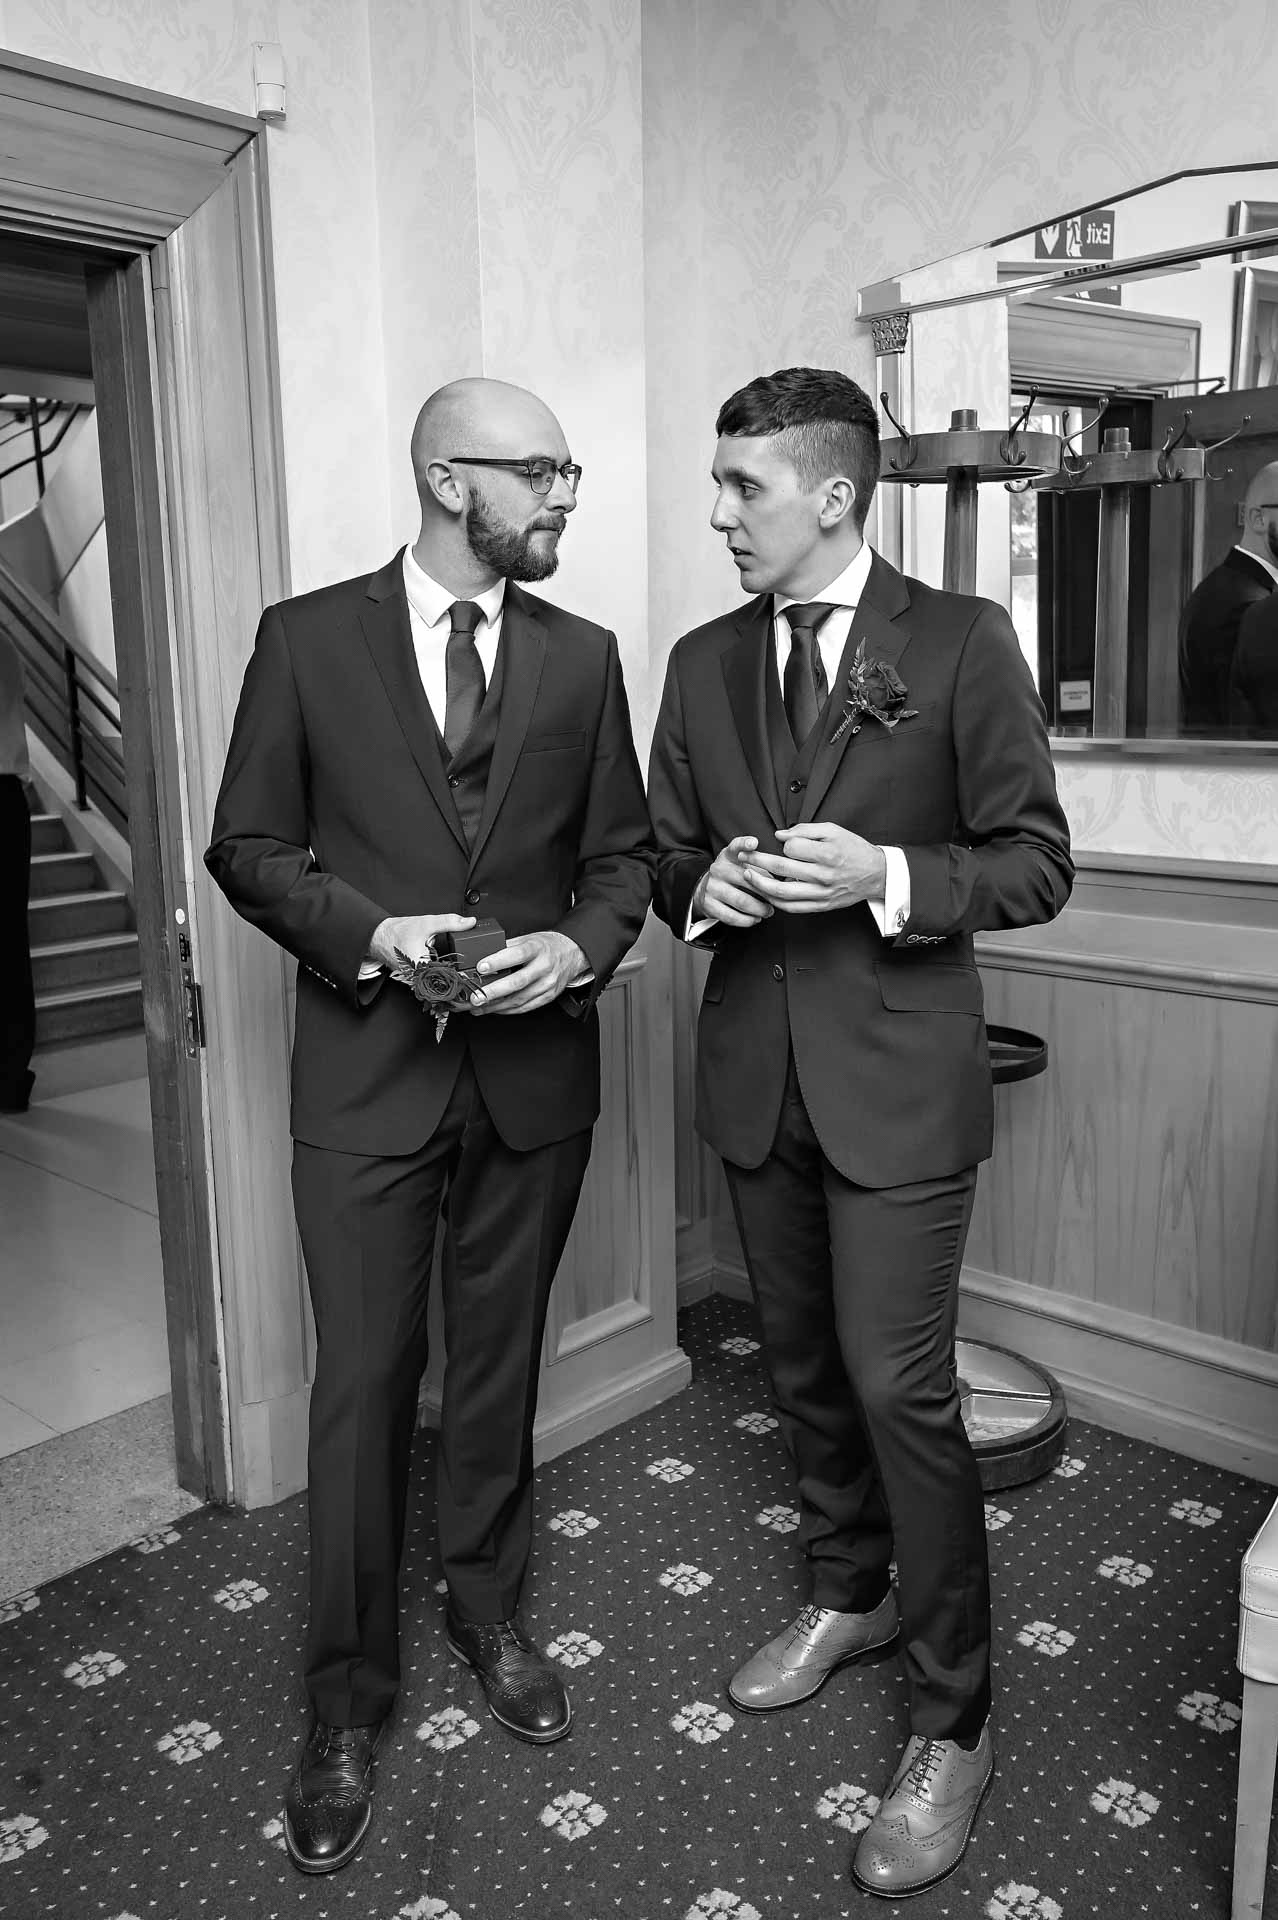 The groom and best man chat before marriage ceremony at Wandsworth Town Hall